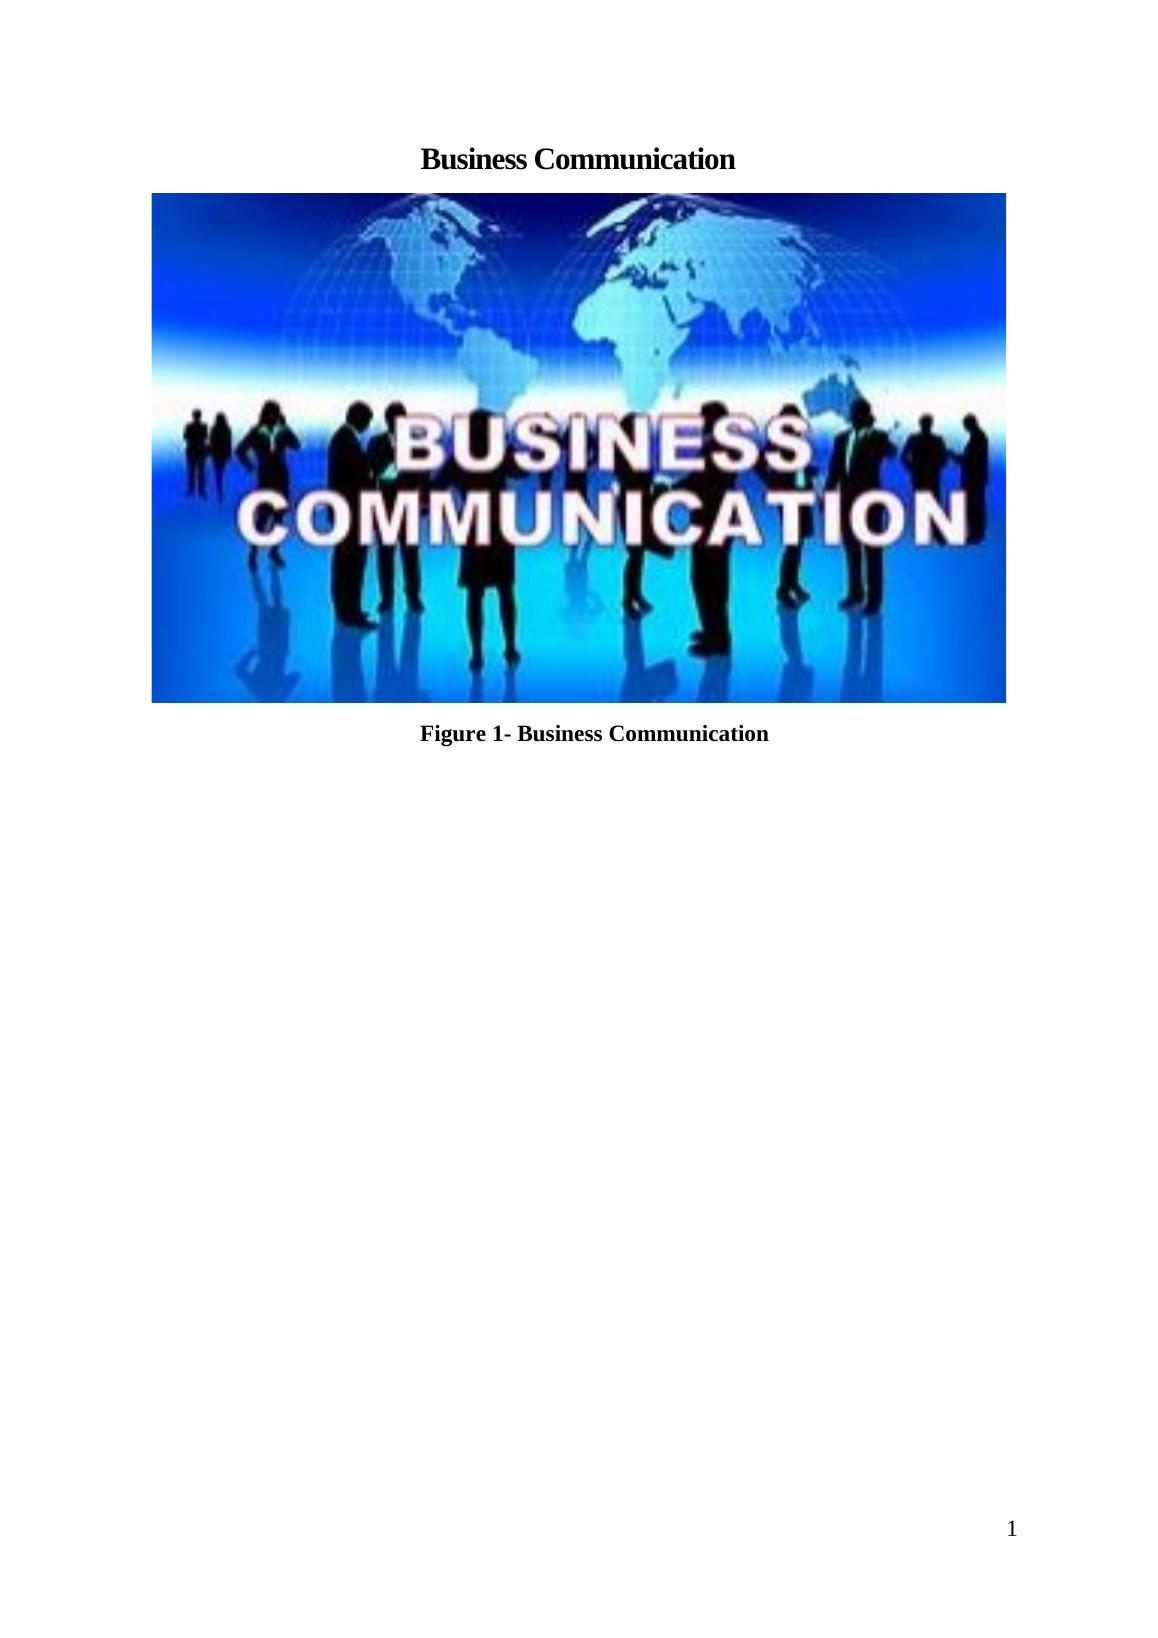 introduction to business communication assignment